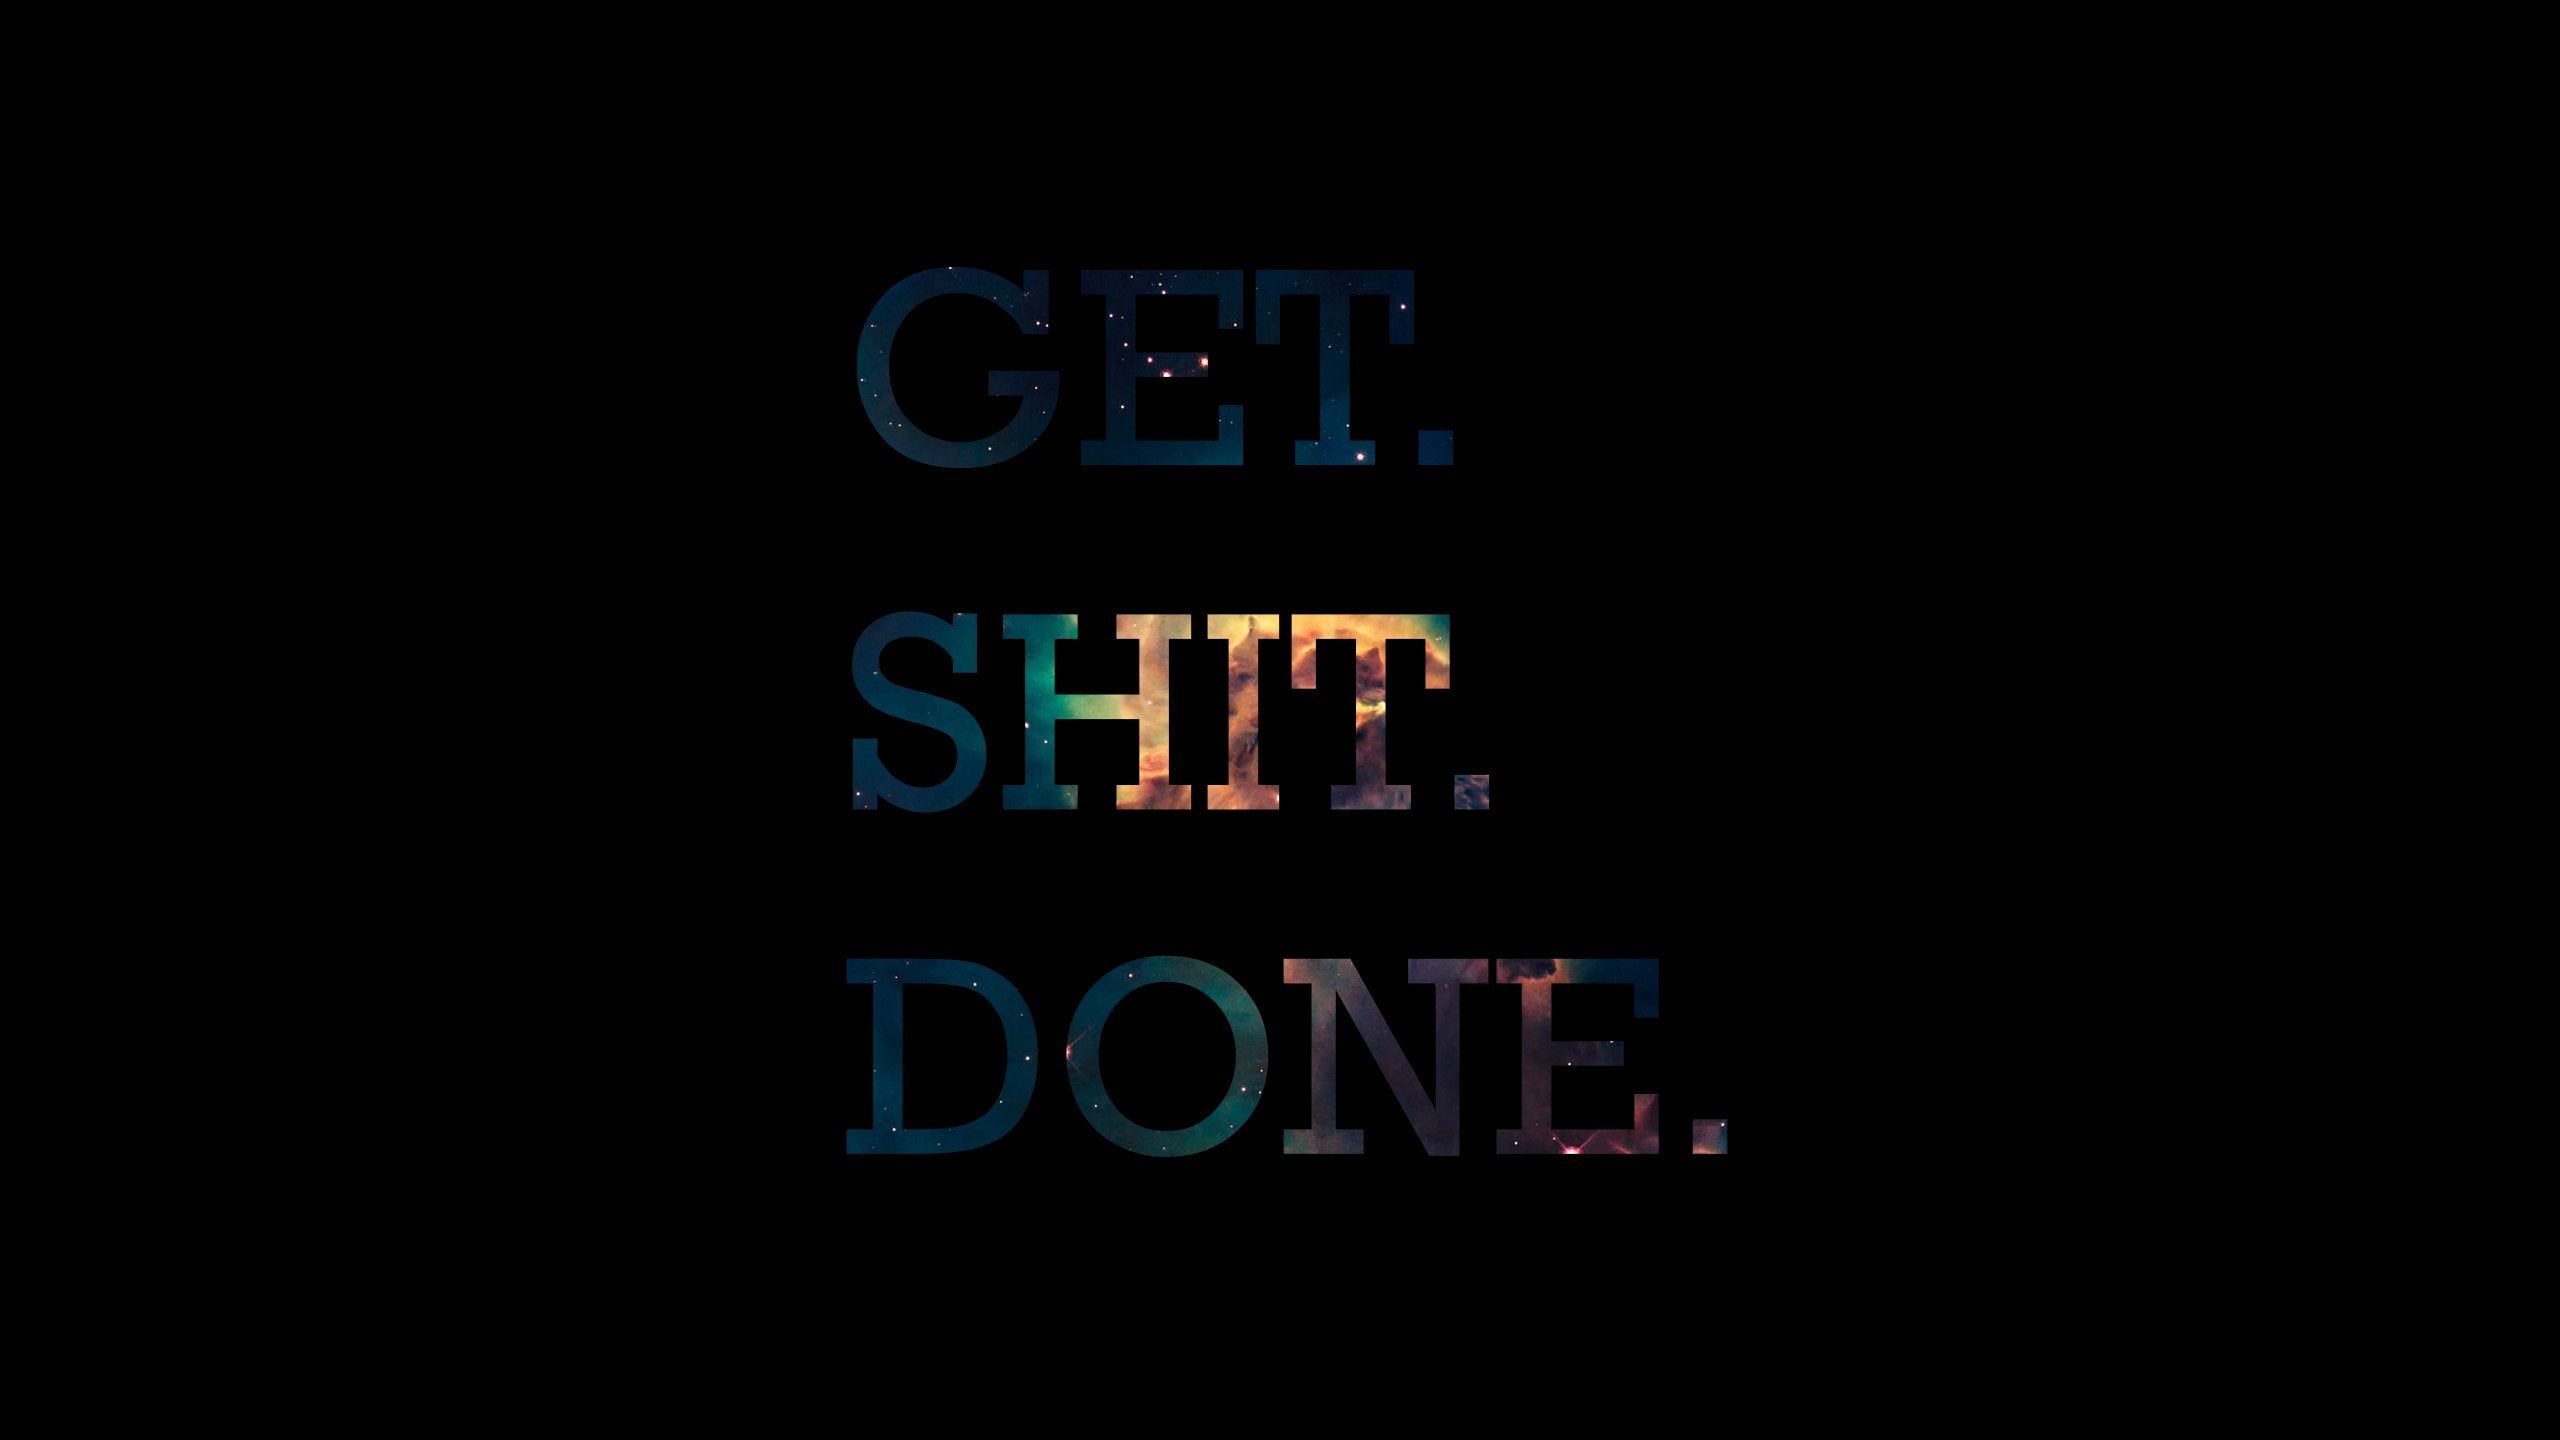 Get. Shit. Done. [2560 x 1440], Offensive_Wallpaper